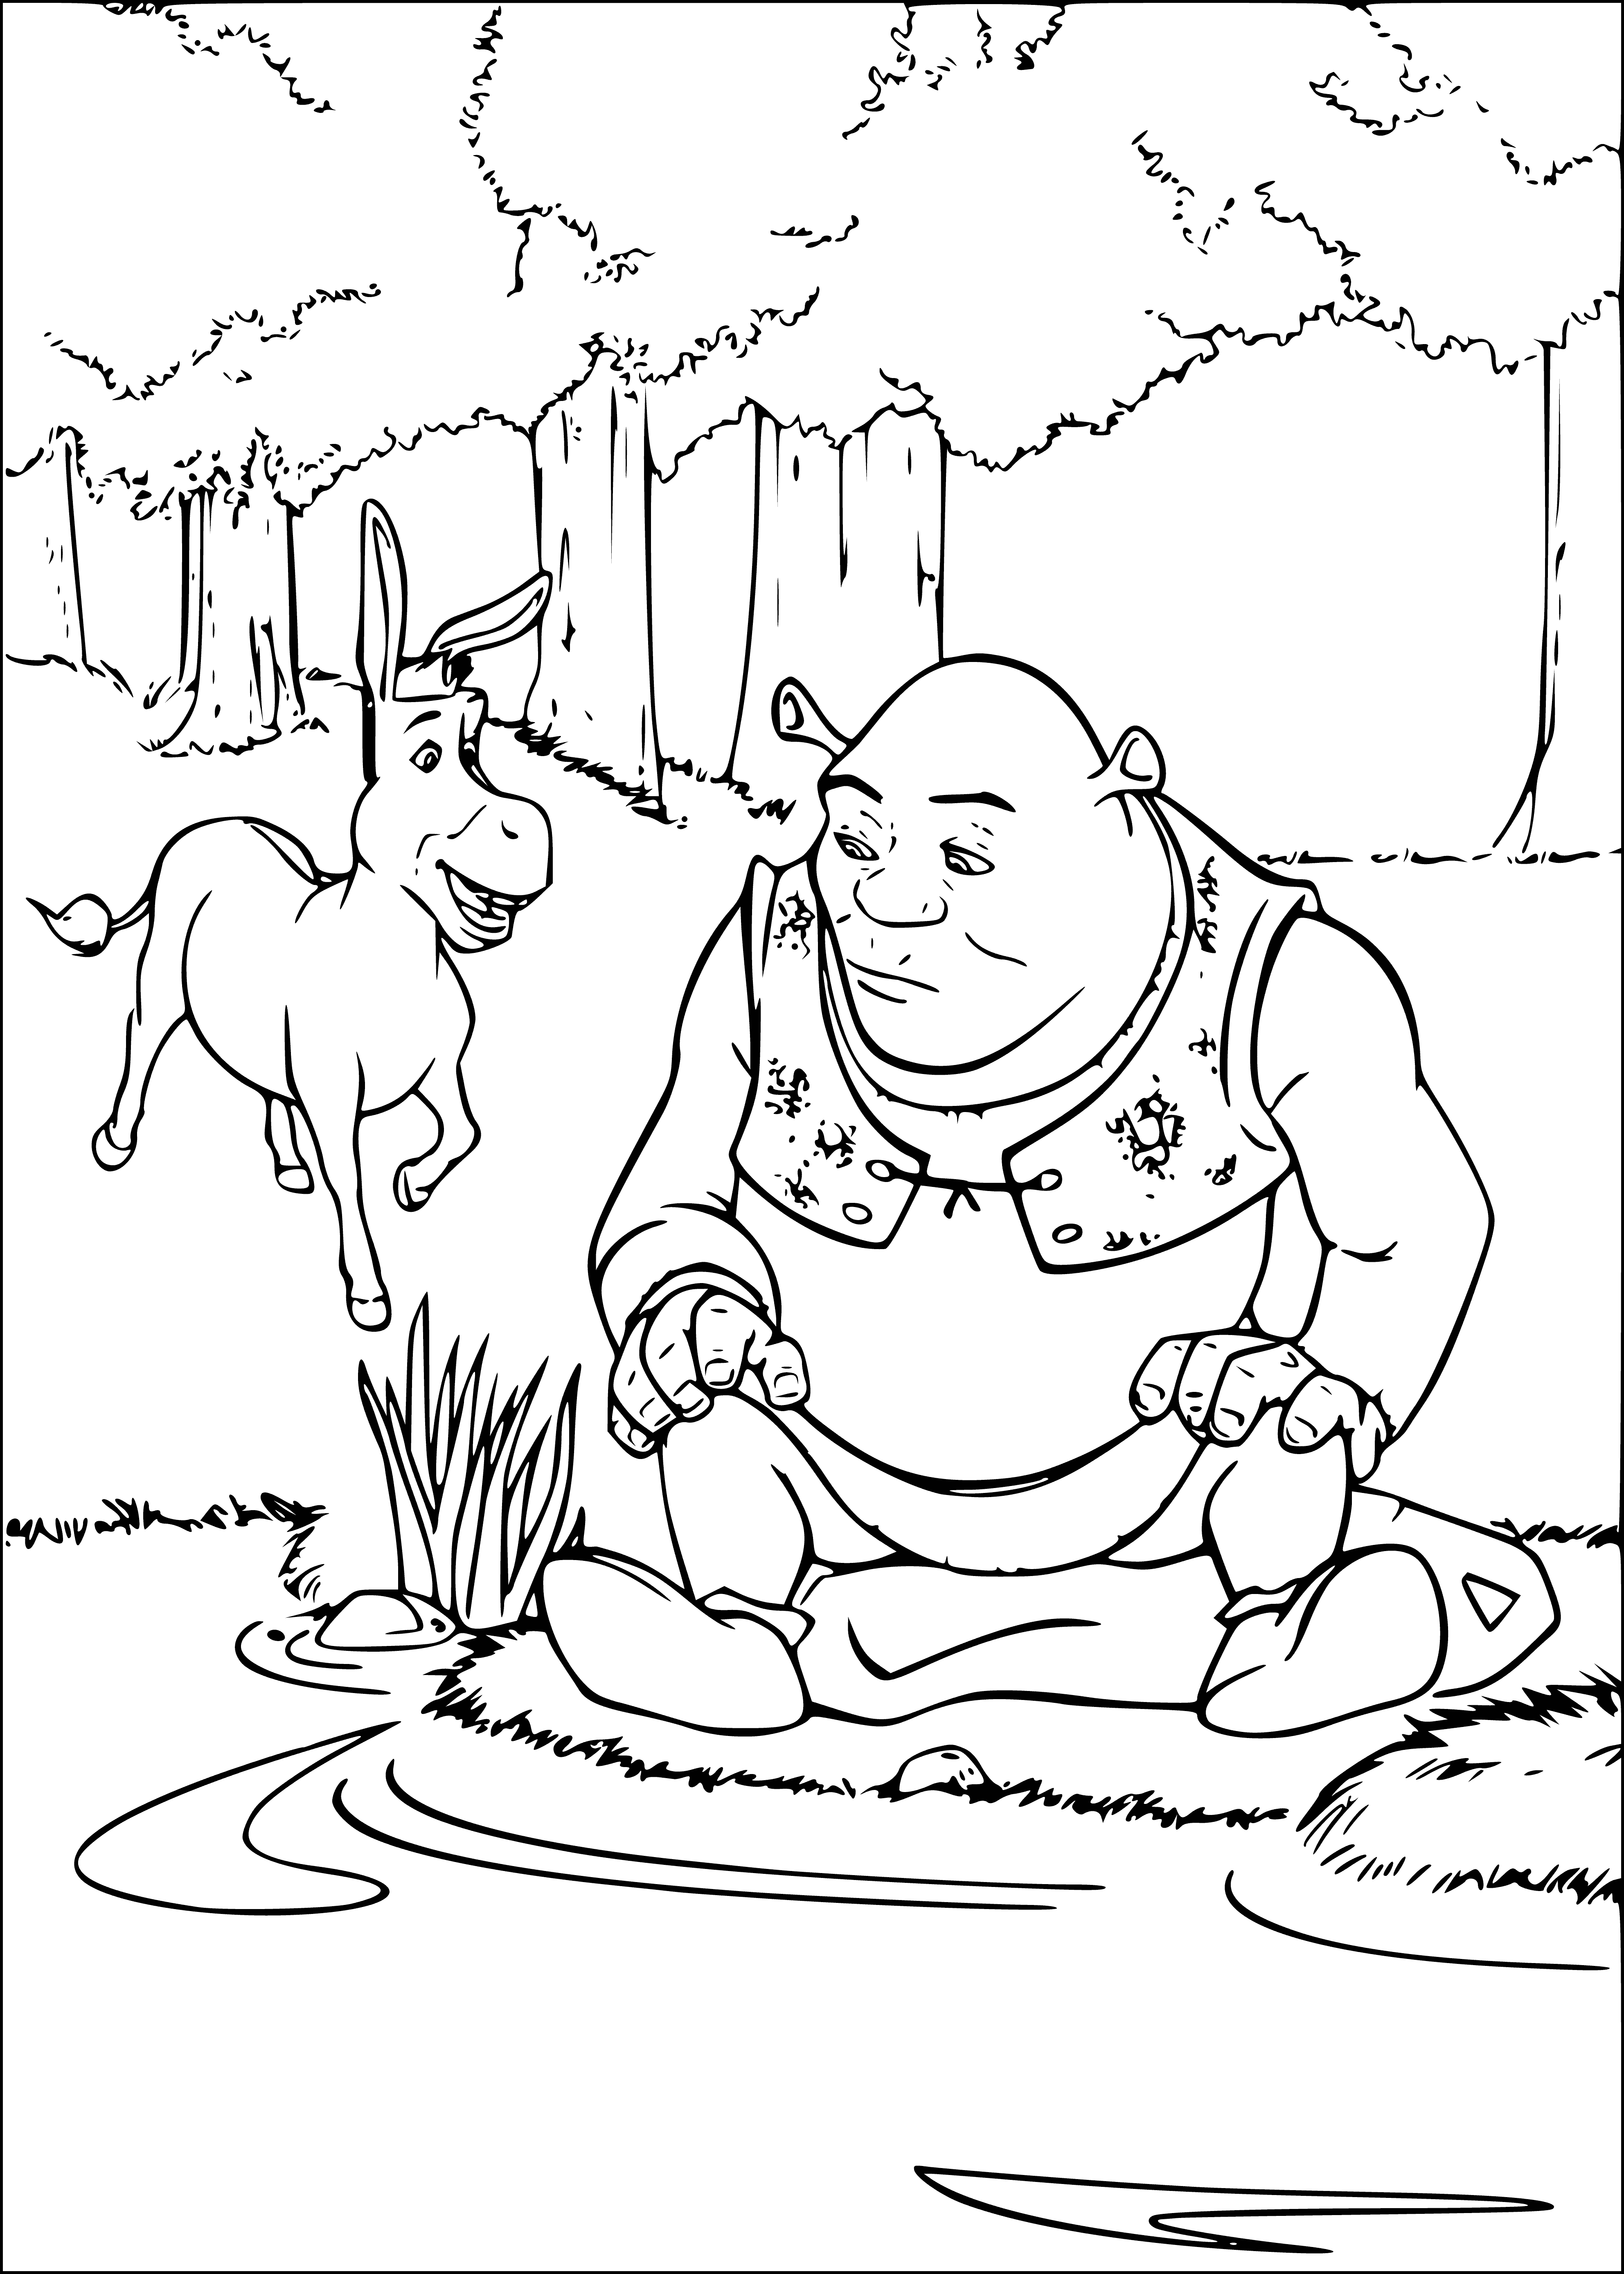 Shrek will be coloring page